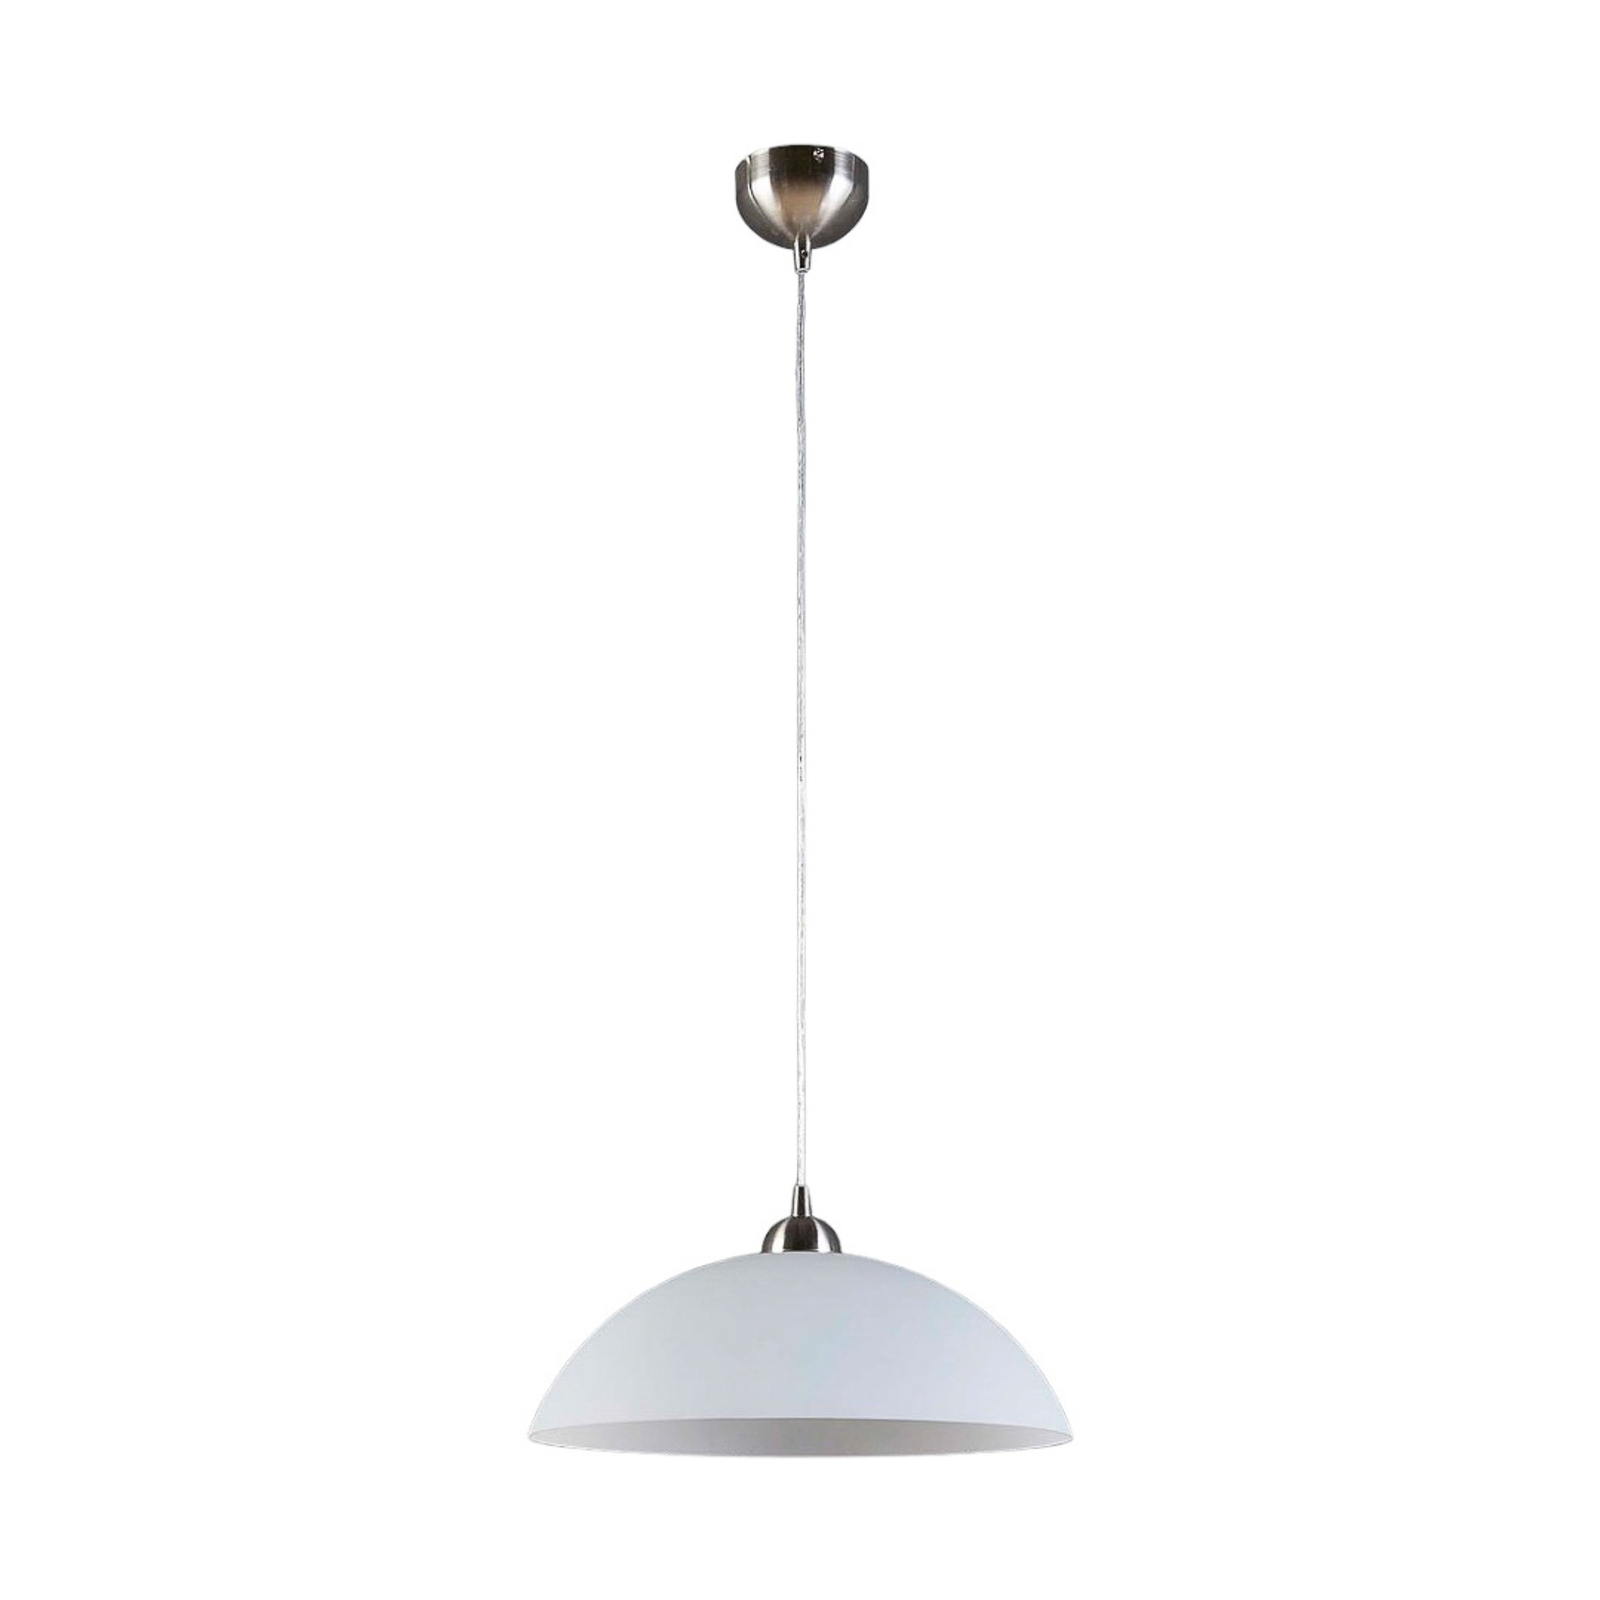 Round glass hanging light Valeria for the kitchen